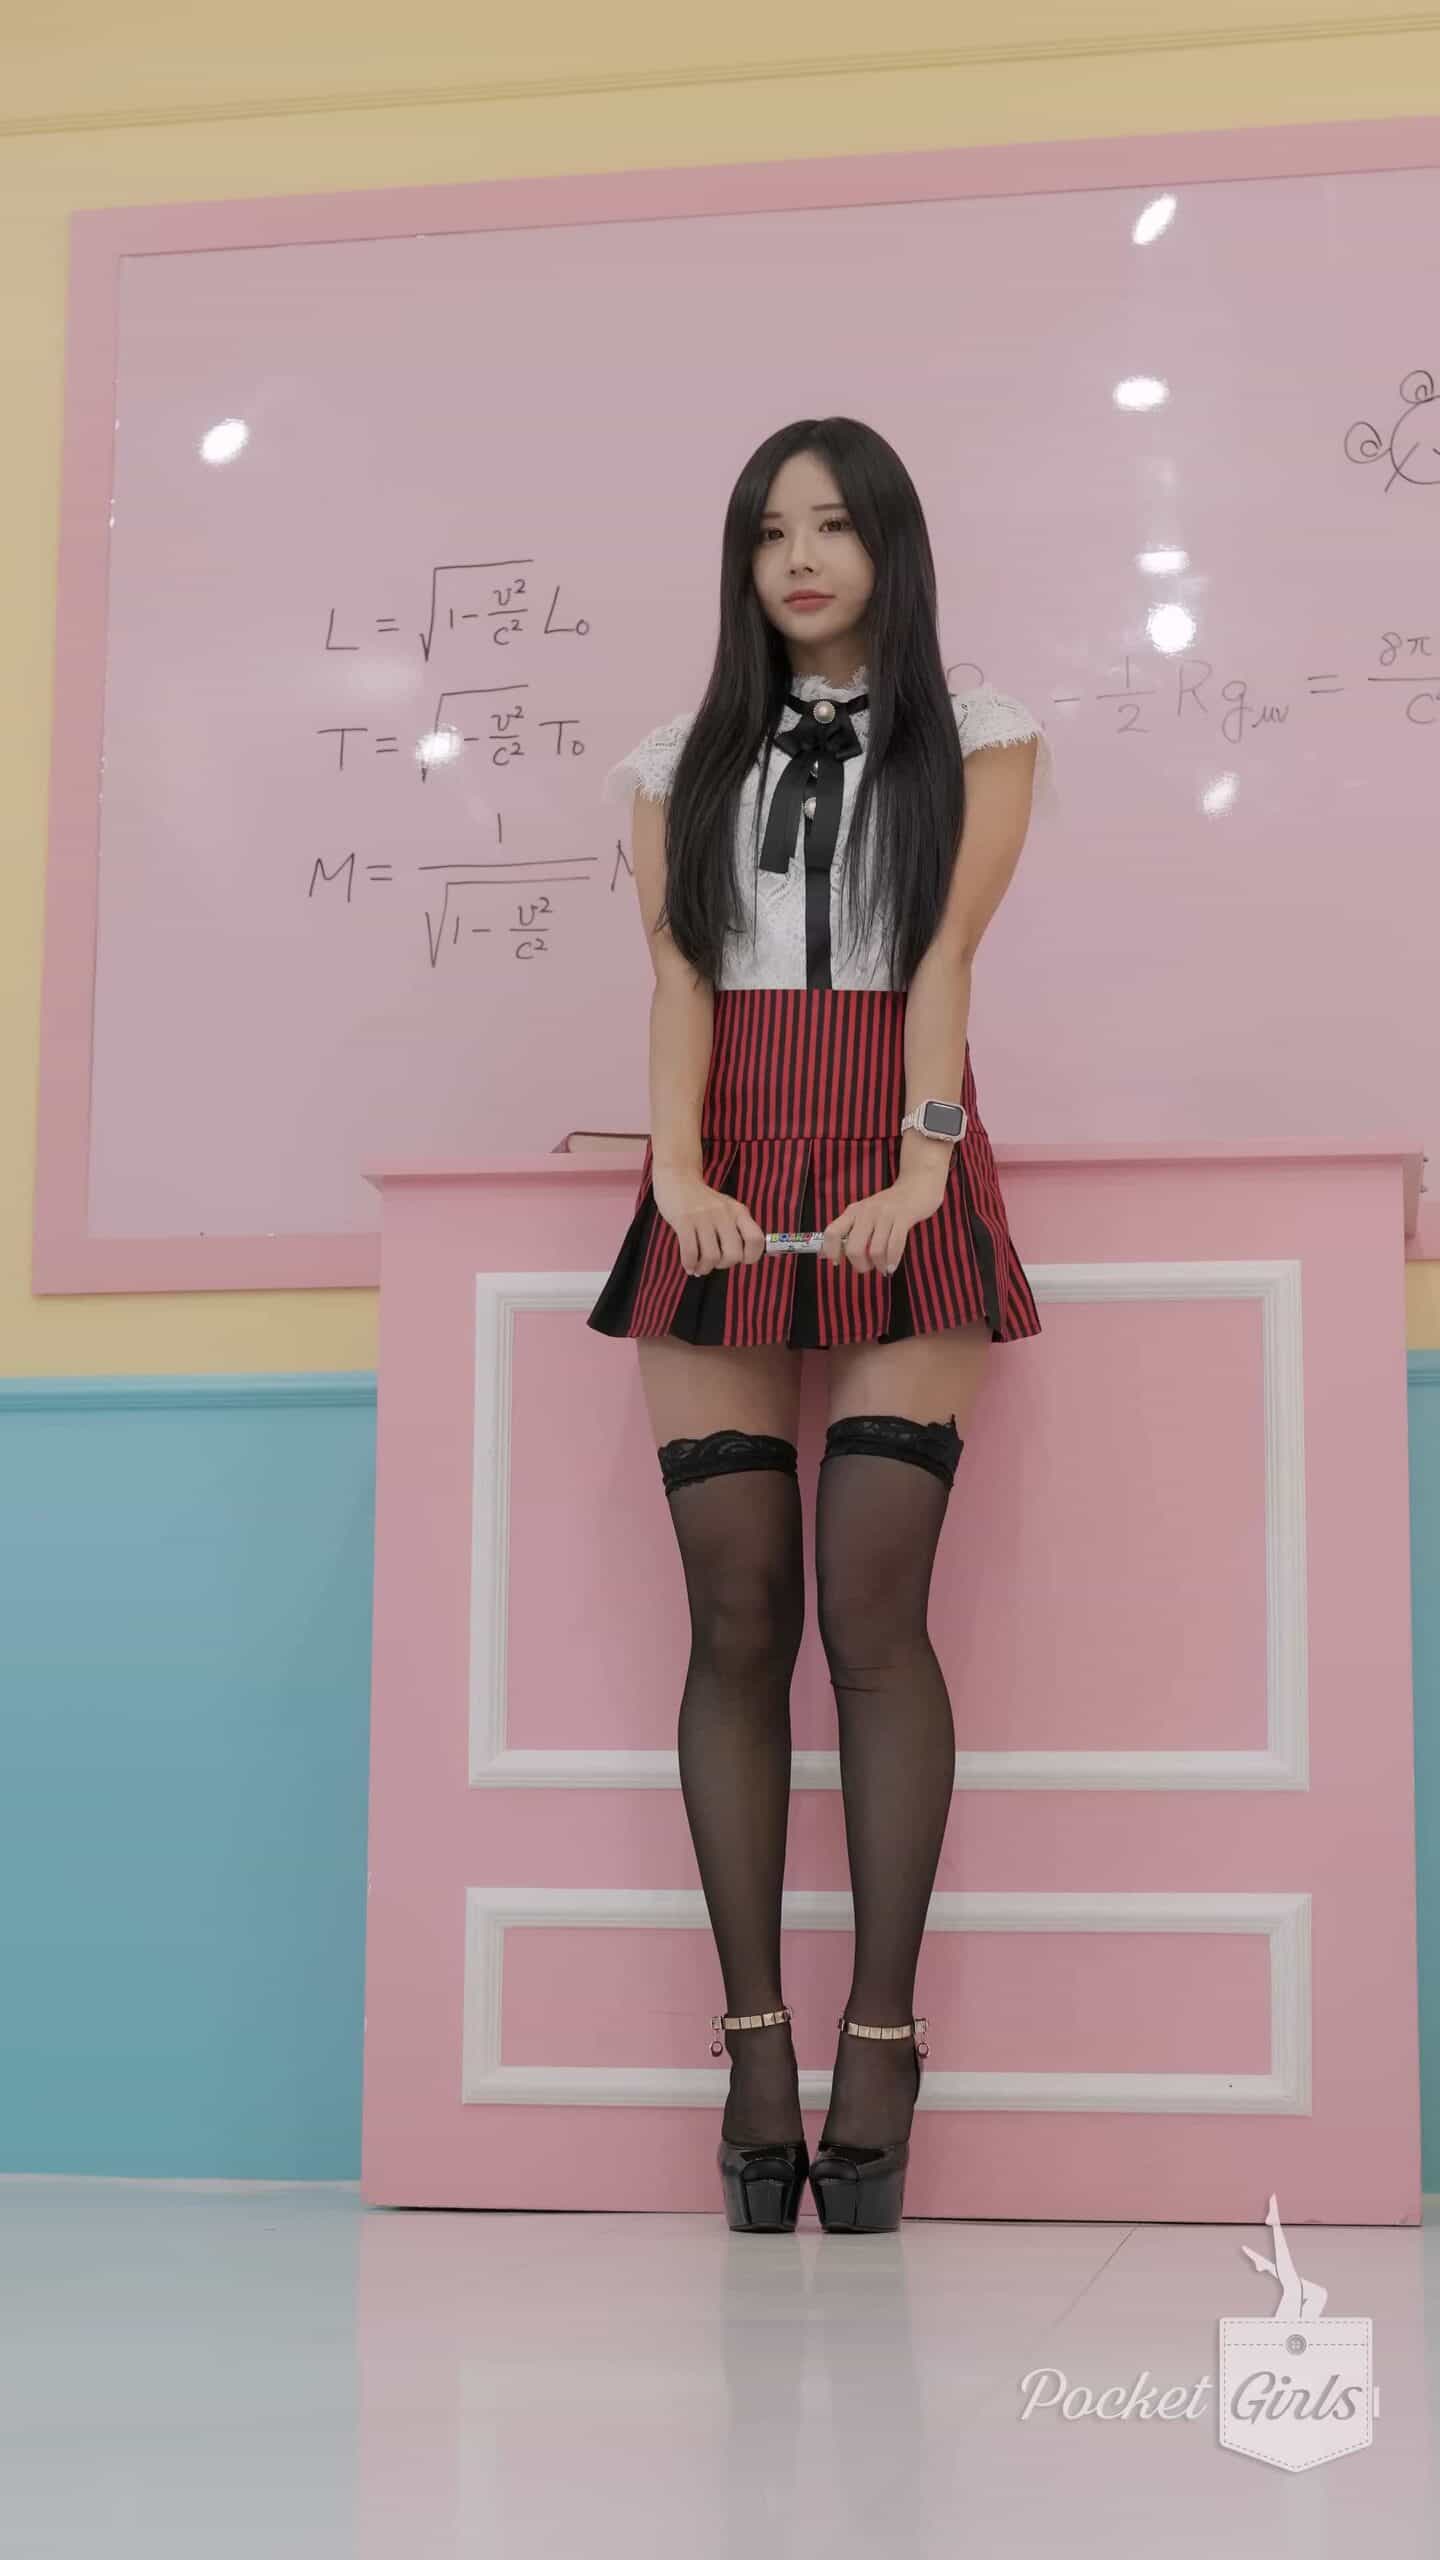 An Awesome Teacher You Wish You Had, Habin, Pocket Girls, 하빈, 포켓걸스, Maybe We’ll Get There – #00221插图1